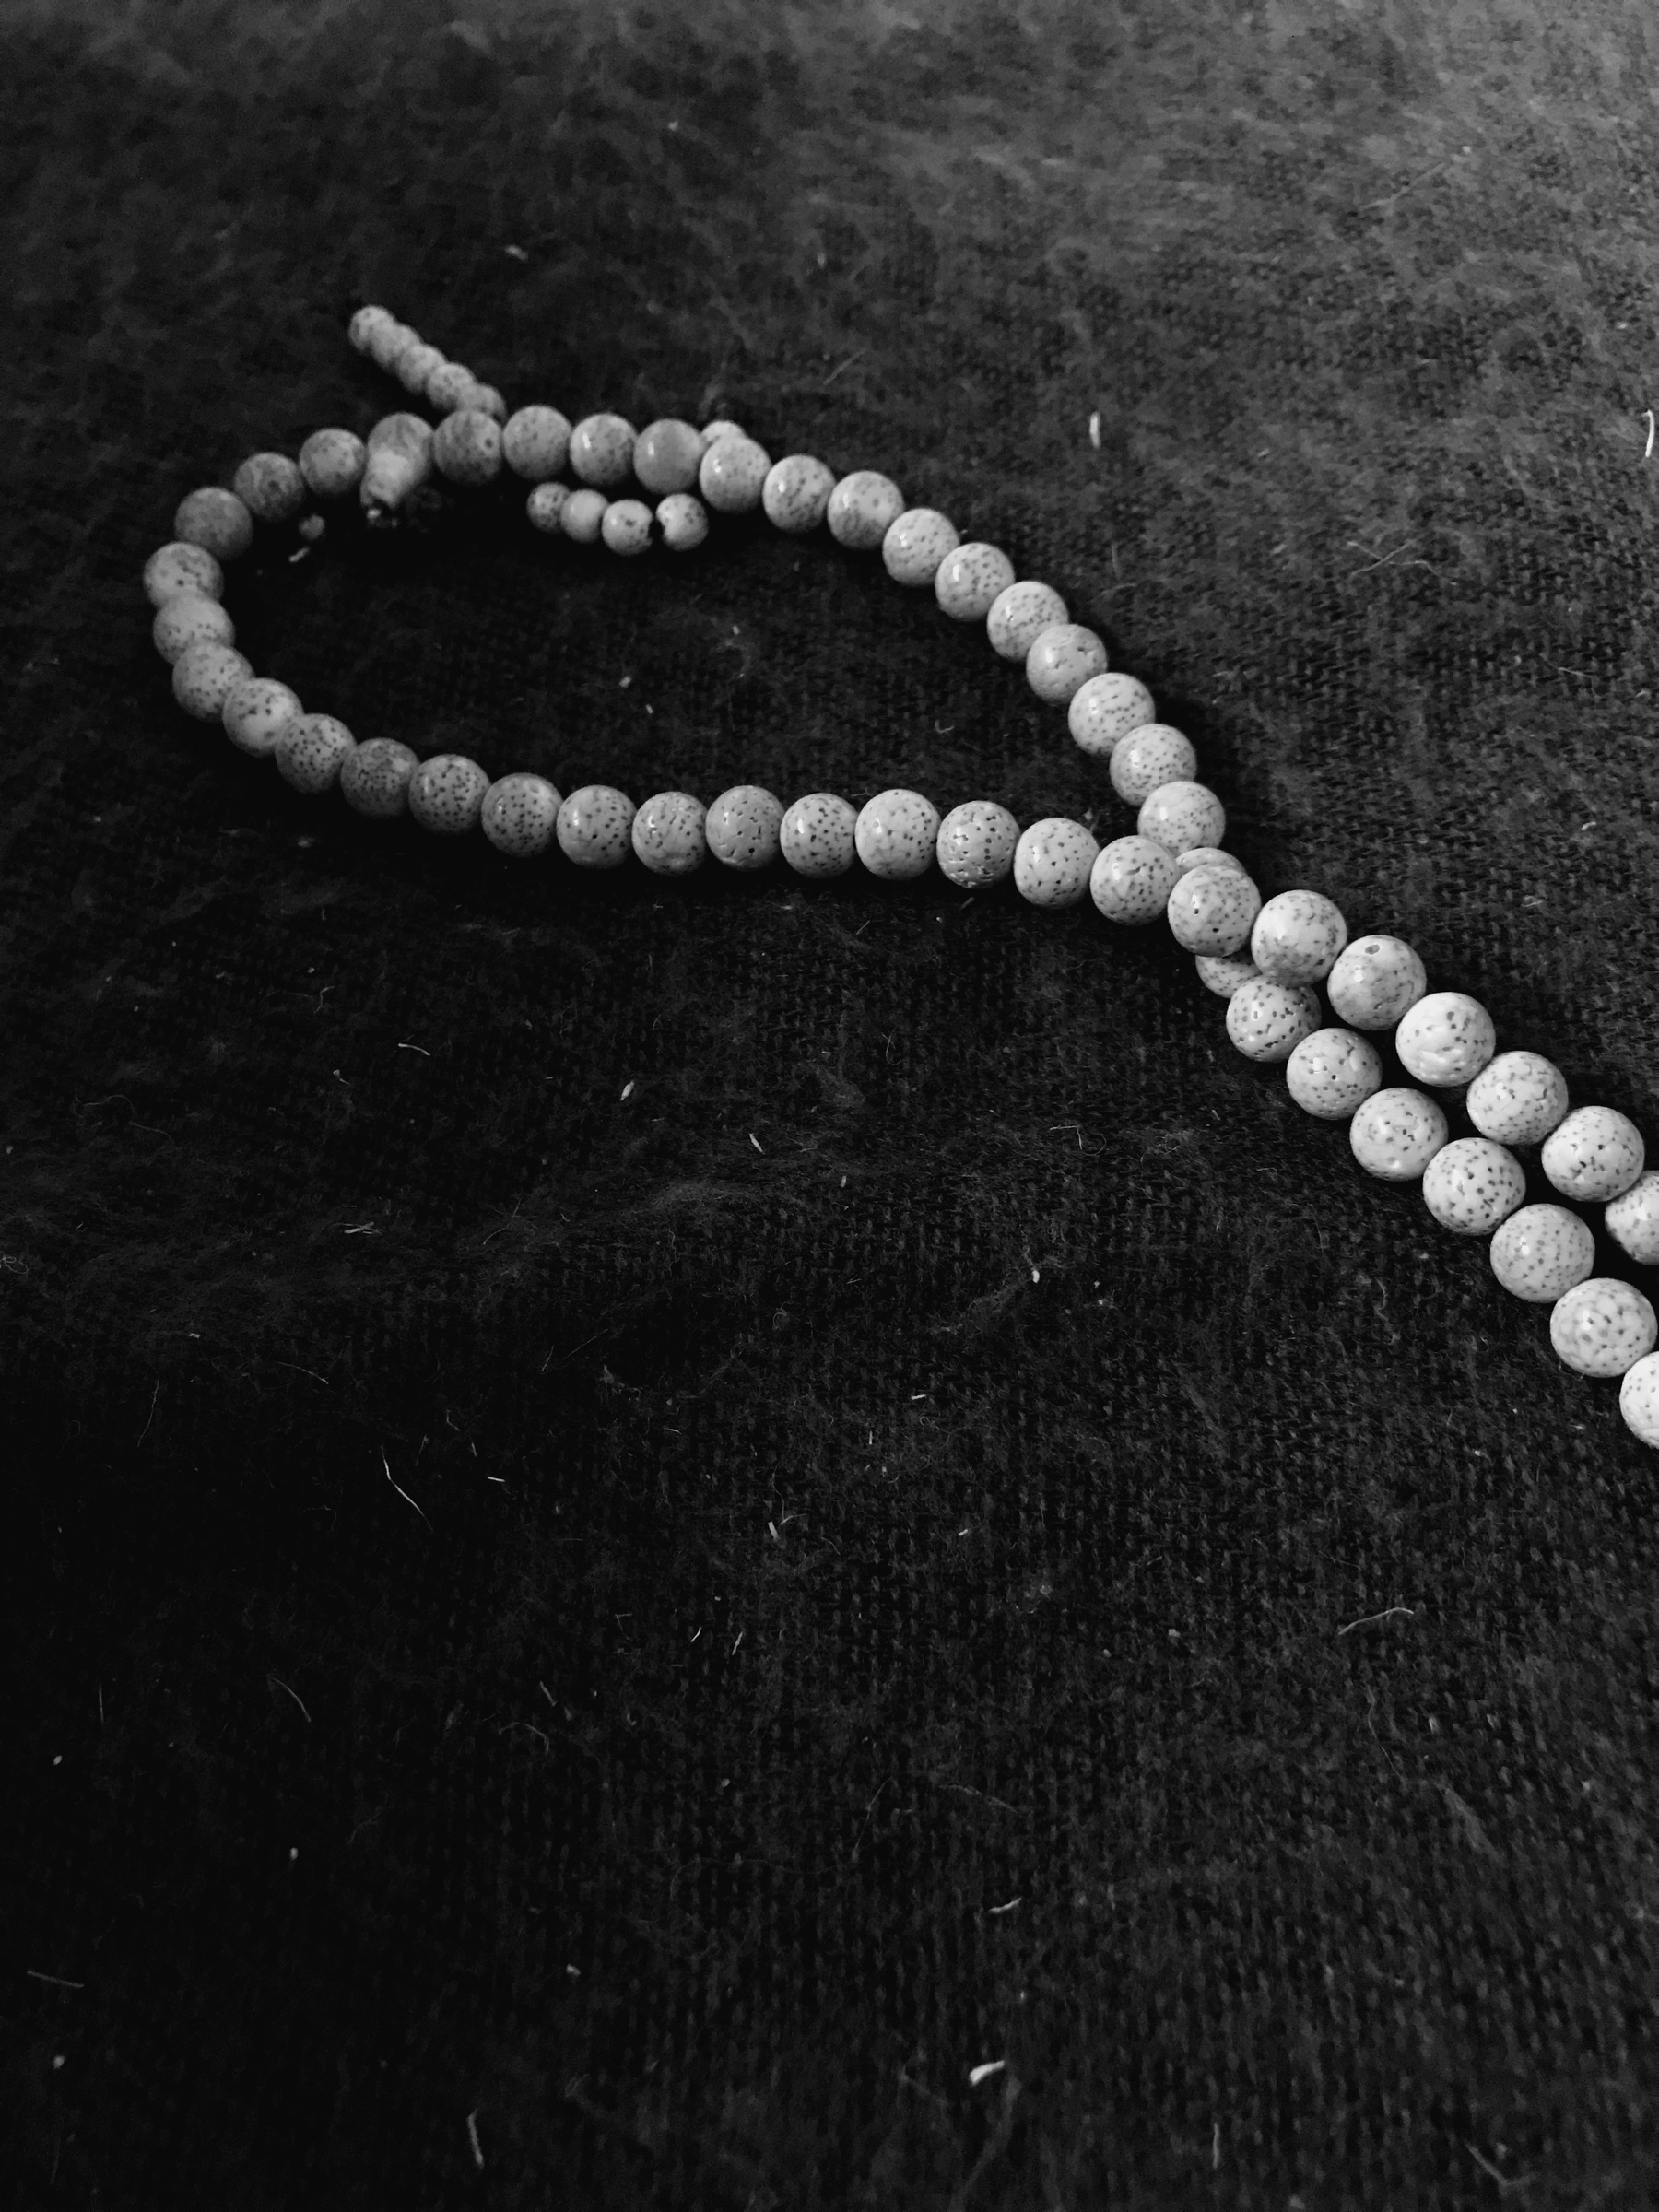 A black and white photograph of my old mala (rosary) on a blanket